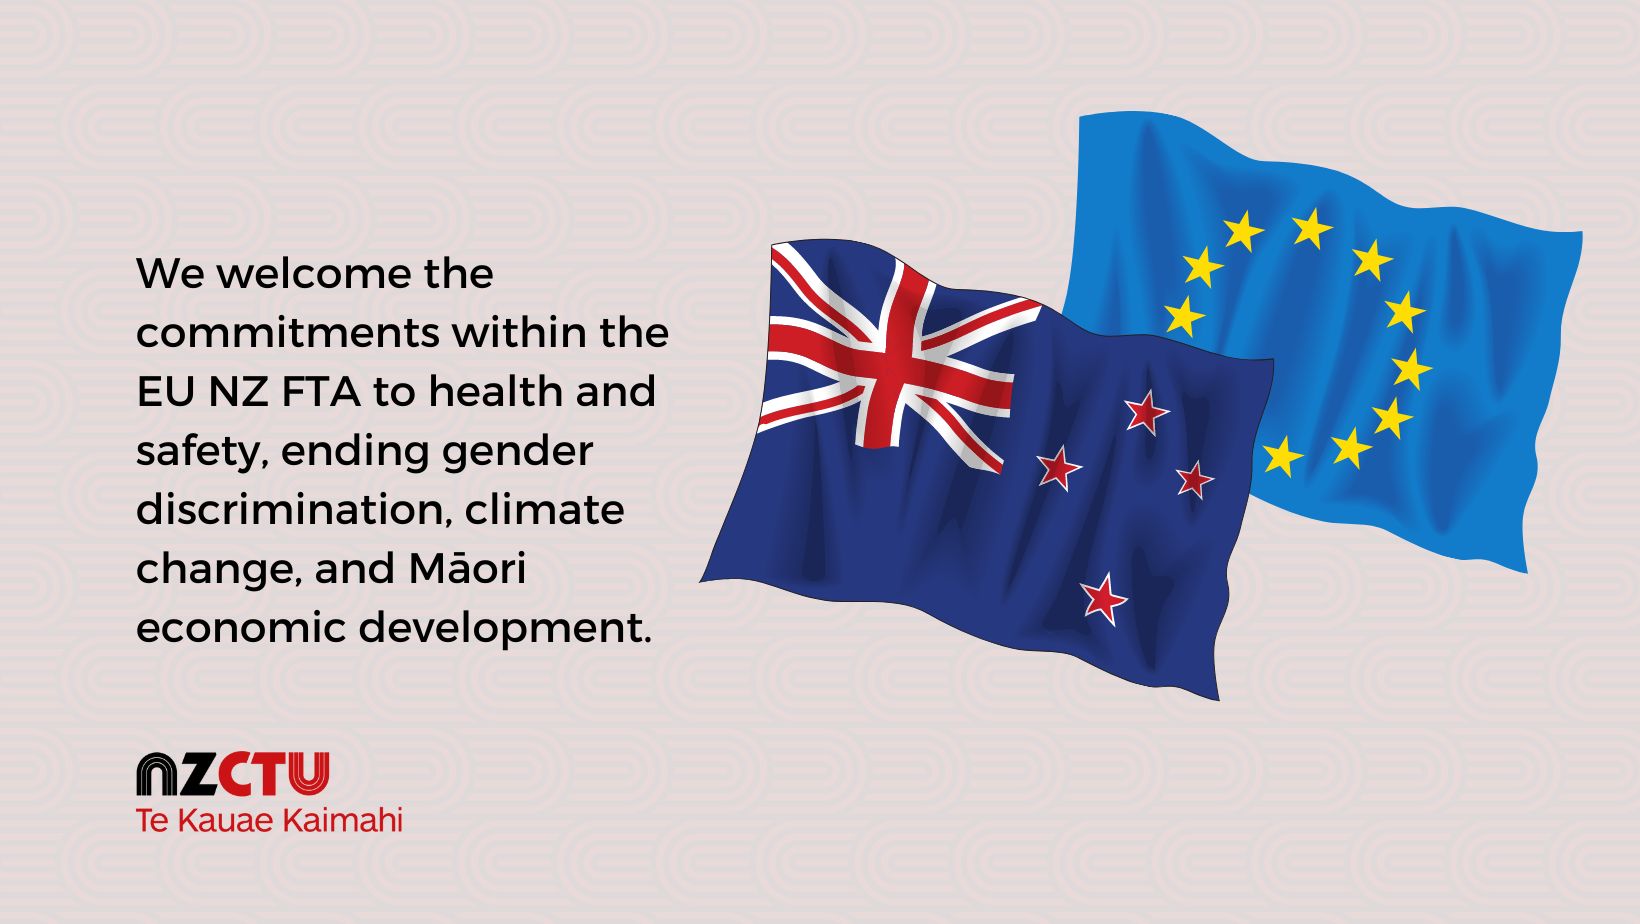 We welcome the commitments within the EU NZ FTA to health and safety, ending gender discrimination, climate change, and Māori economic development.